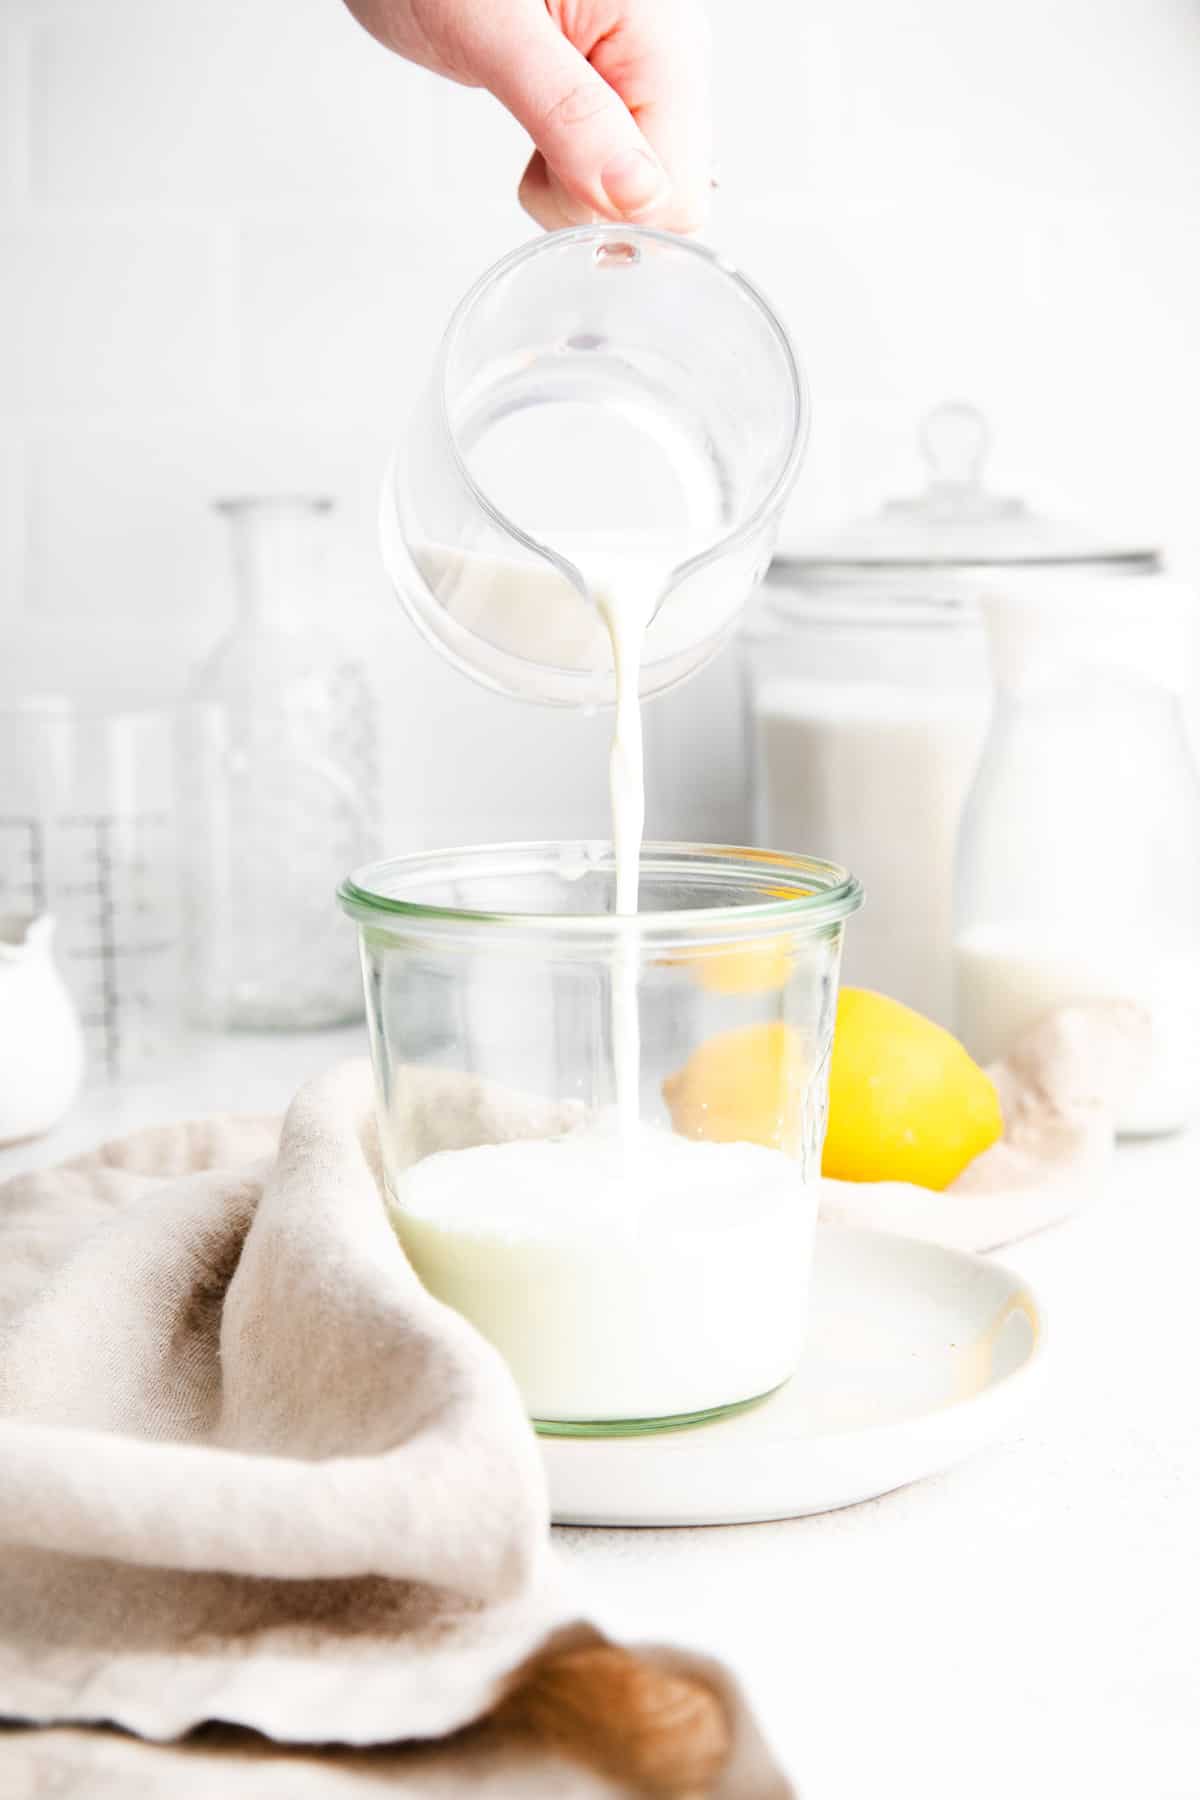 Buttermilk being poured from a small glass pitcher into a little jar.